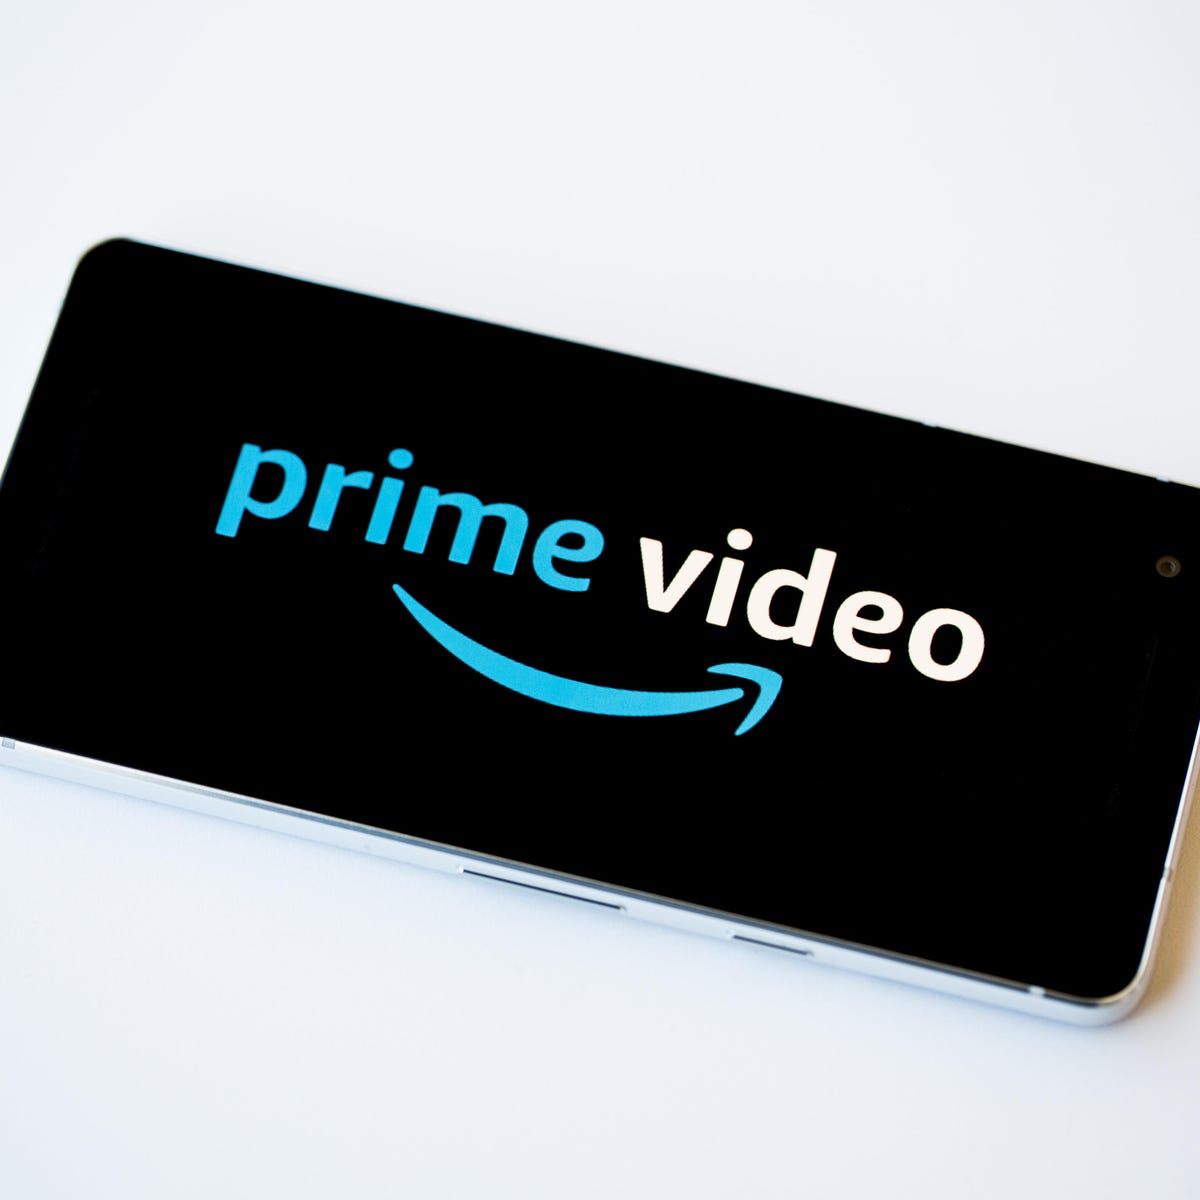 Amazon Prime Video Returns To Apple S App Store After Mysterious Disappearance Cnet